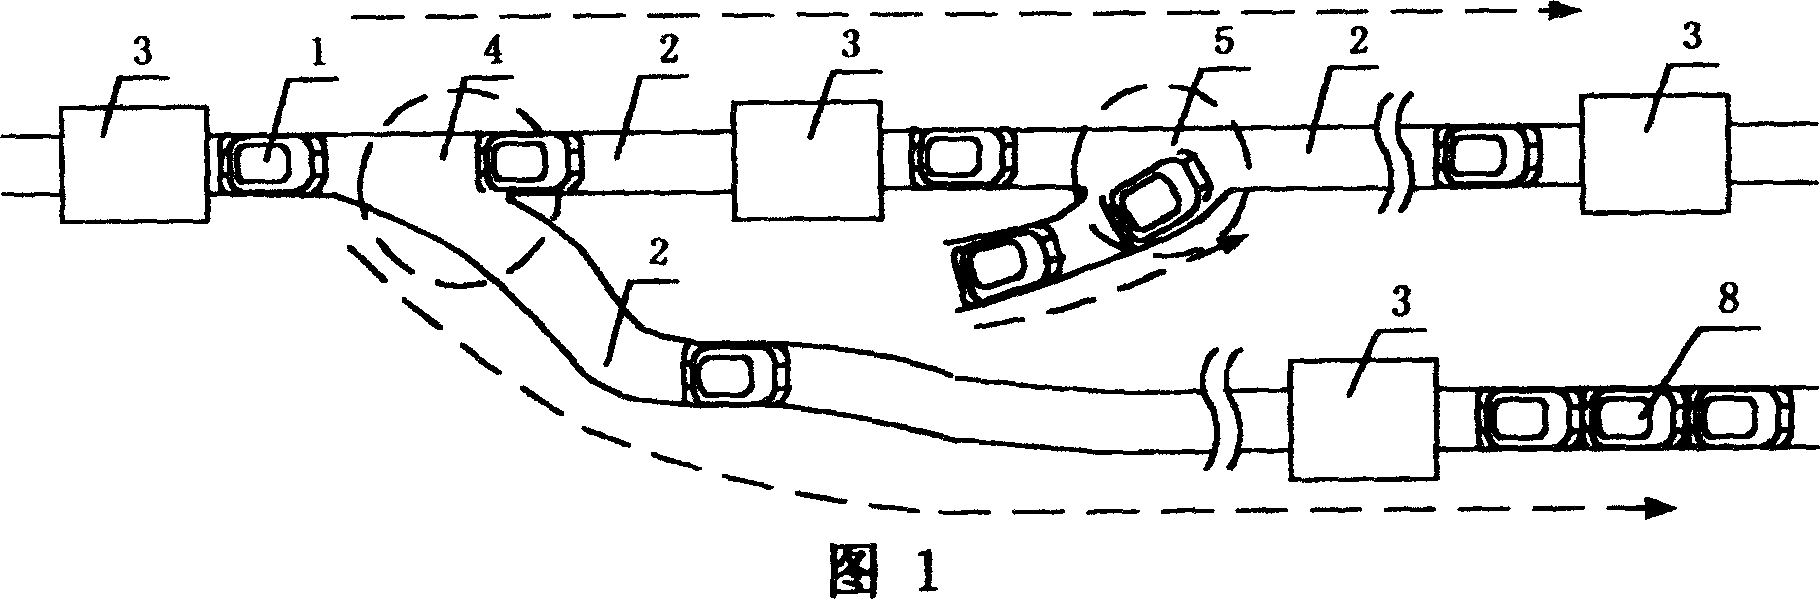 Rail transportation system of small vehicle